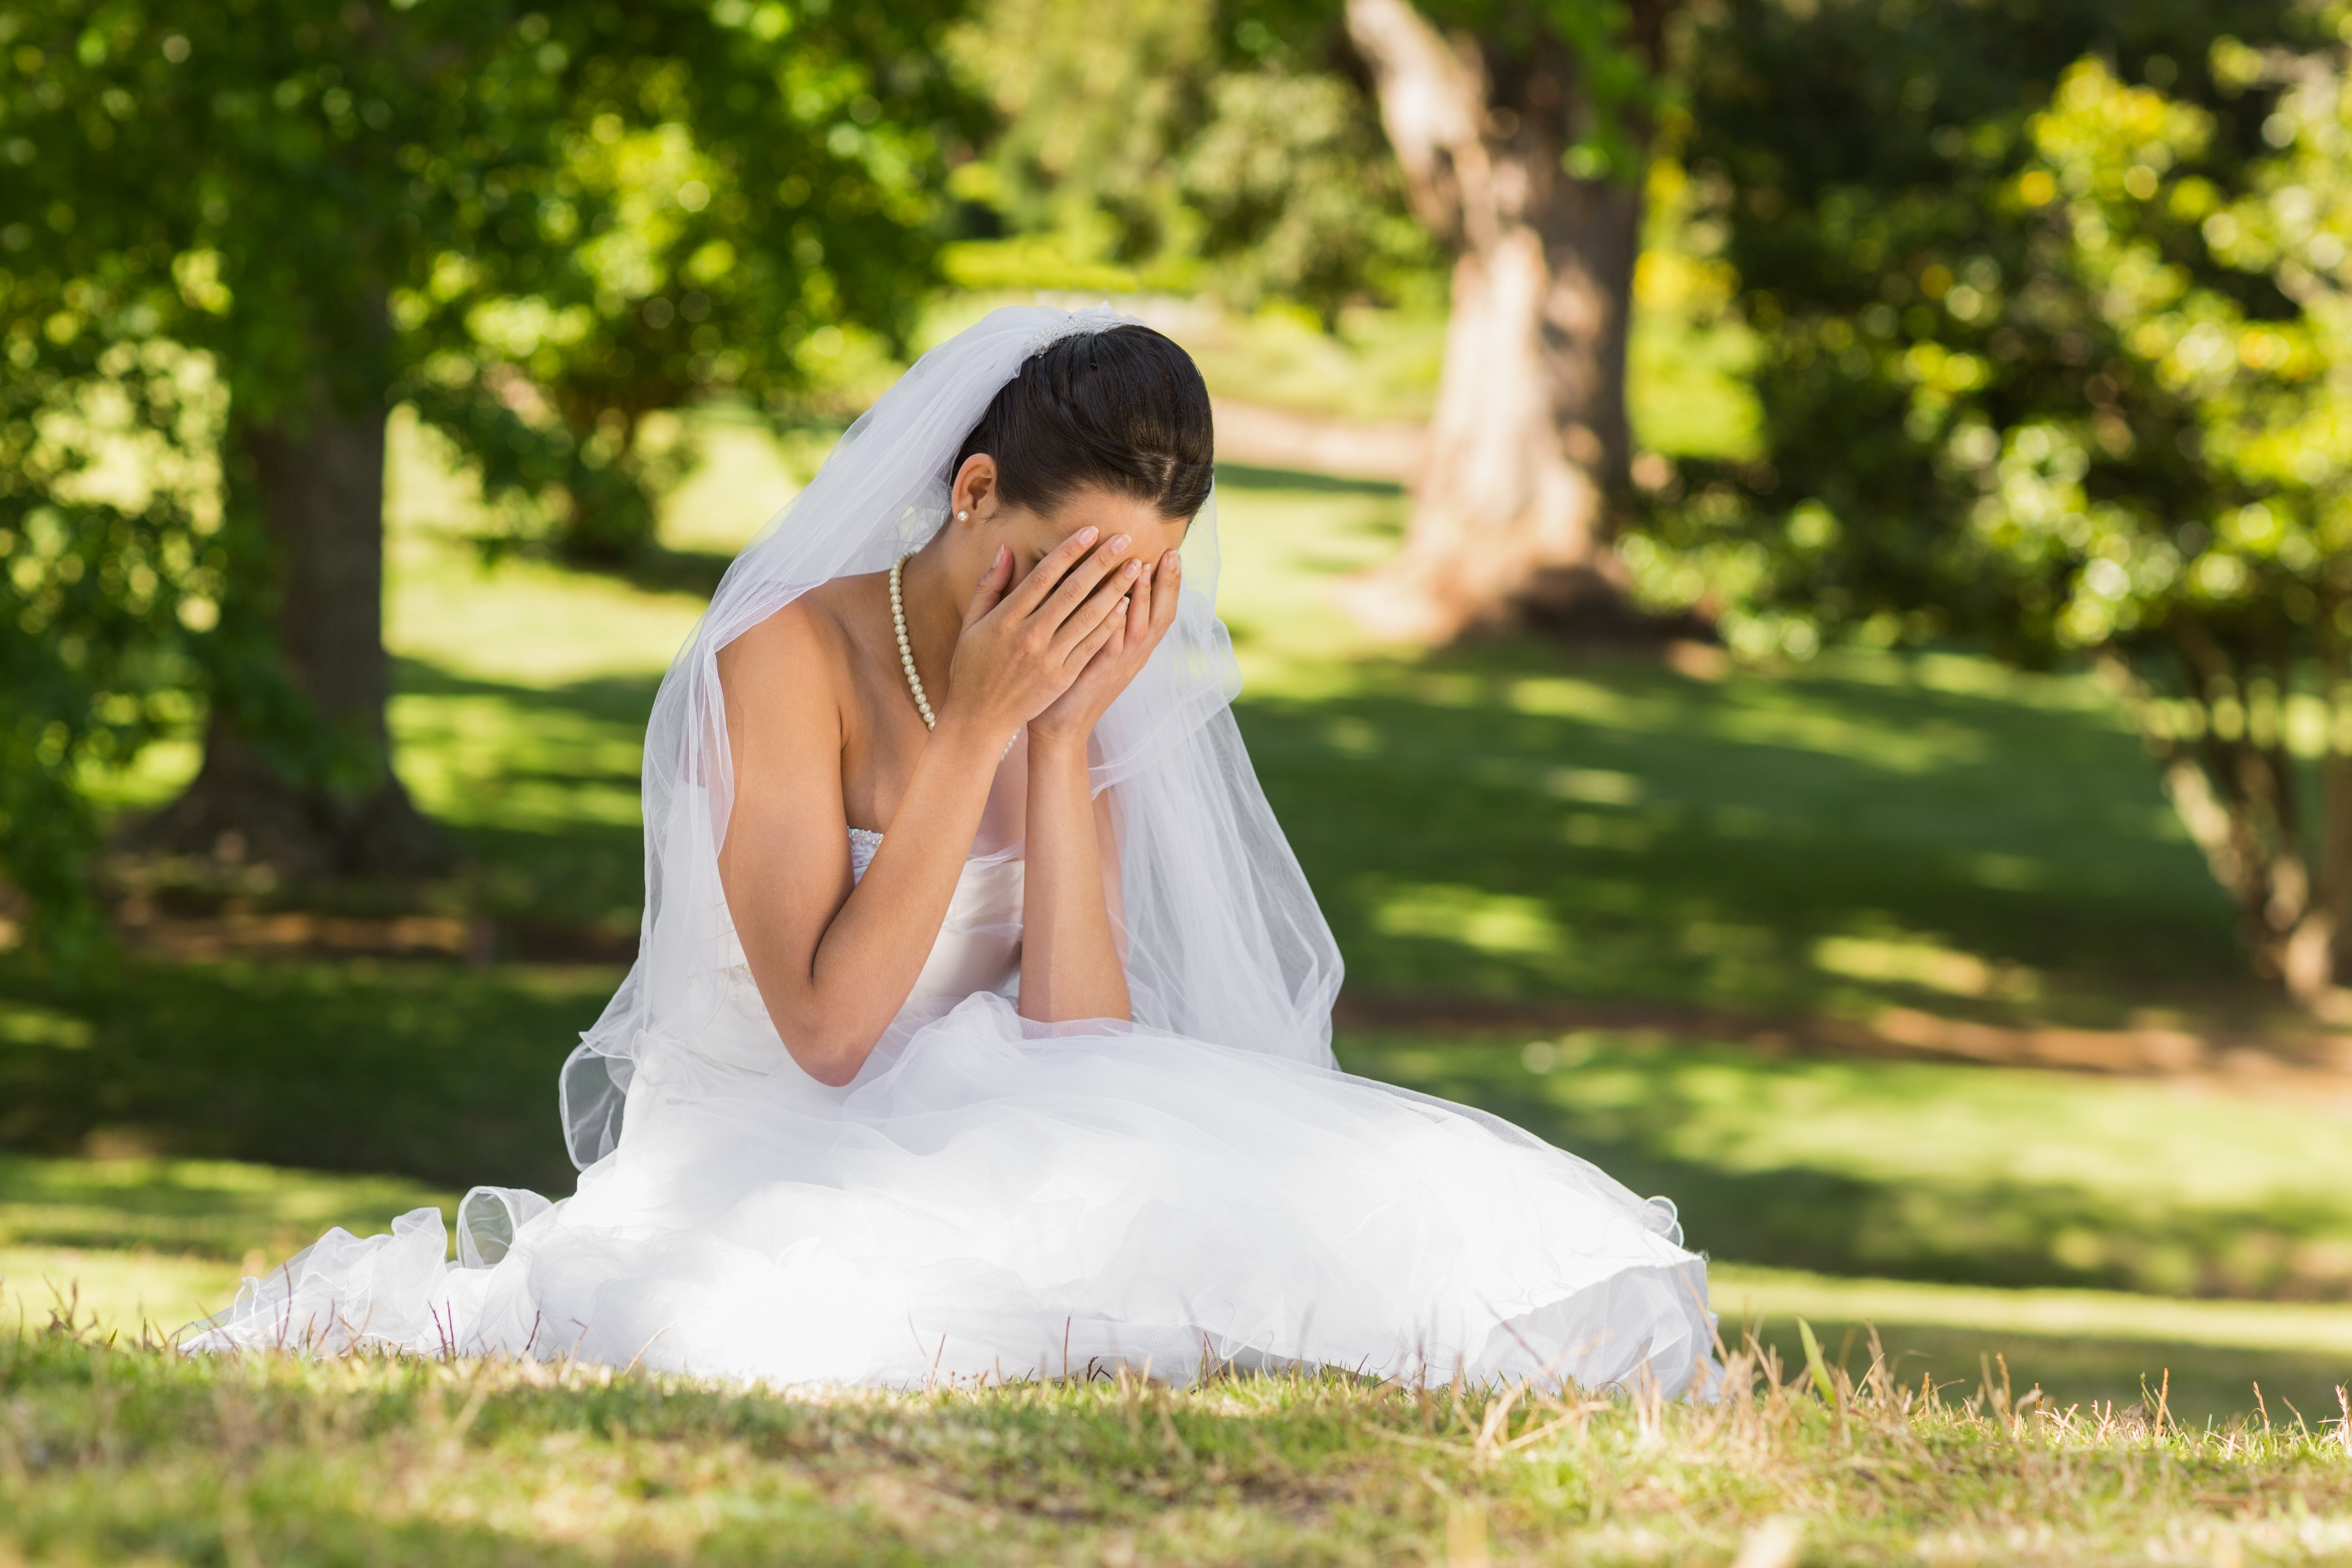 A bride crying in a park | Source: Shutterstock